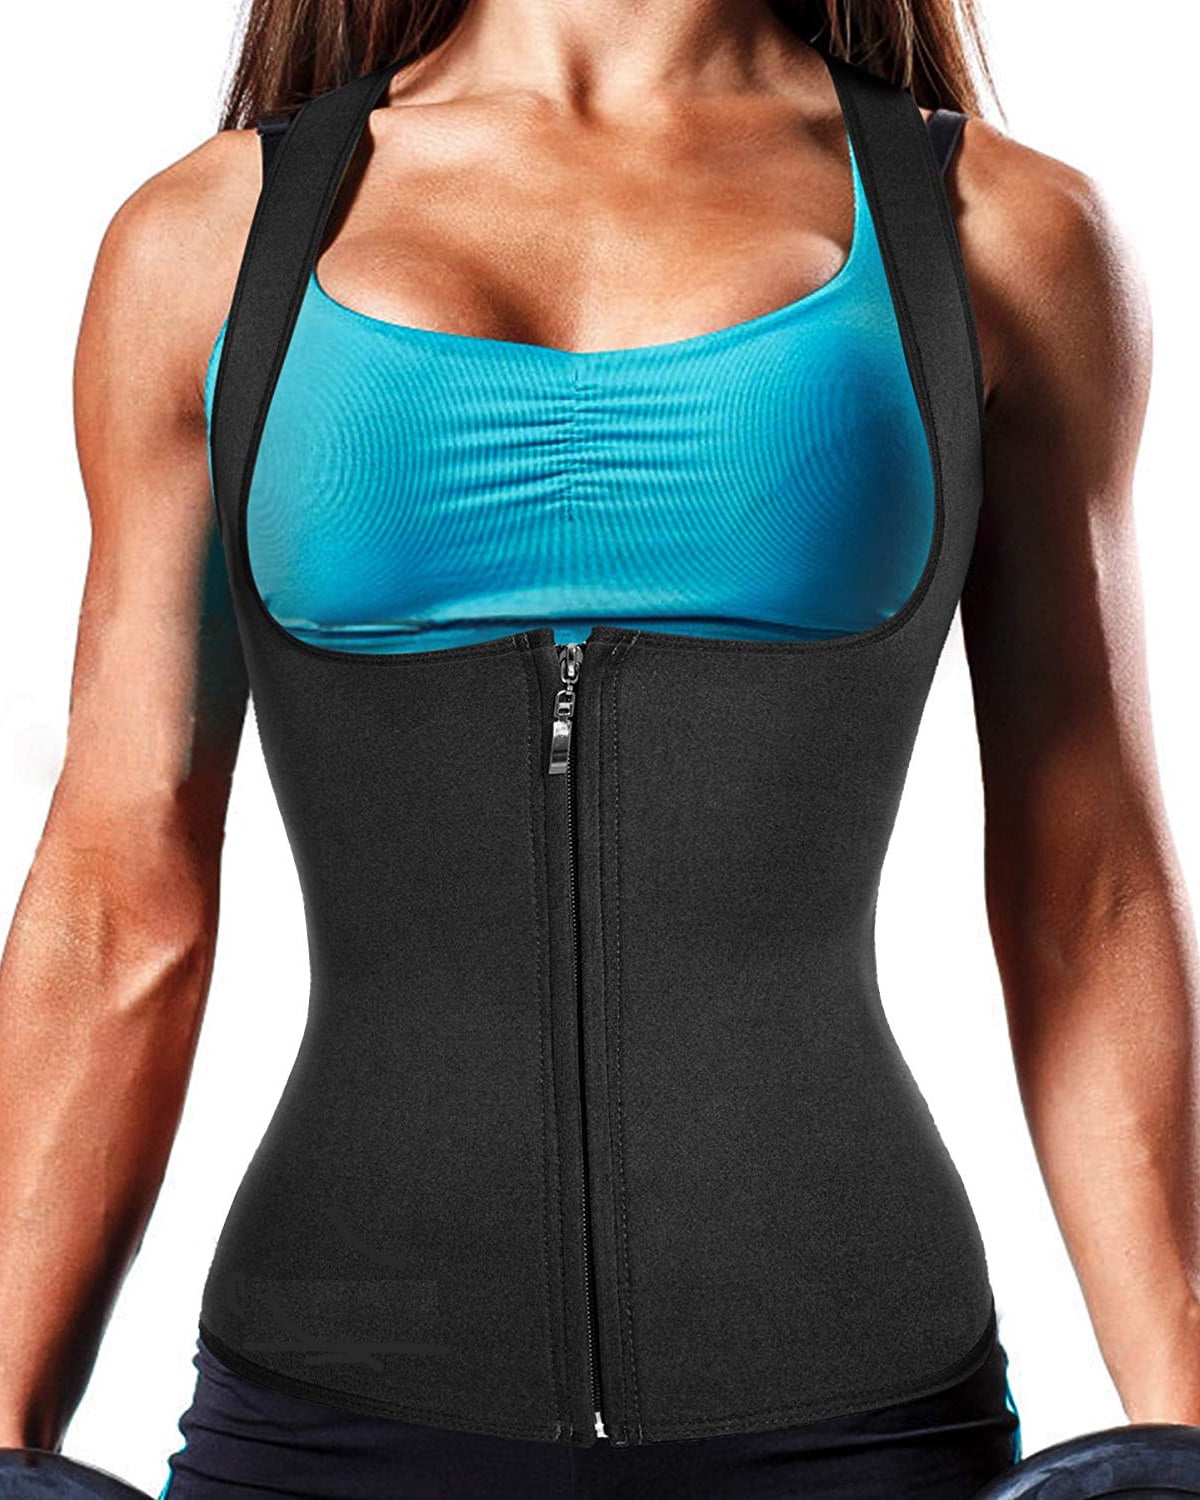 Sweat Waist Trainer Girdle Workout Sauna Tank Top Vest for Women Weight Loss Exercise Double Tummy Slimmer